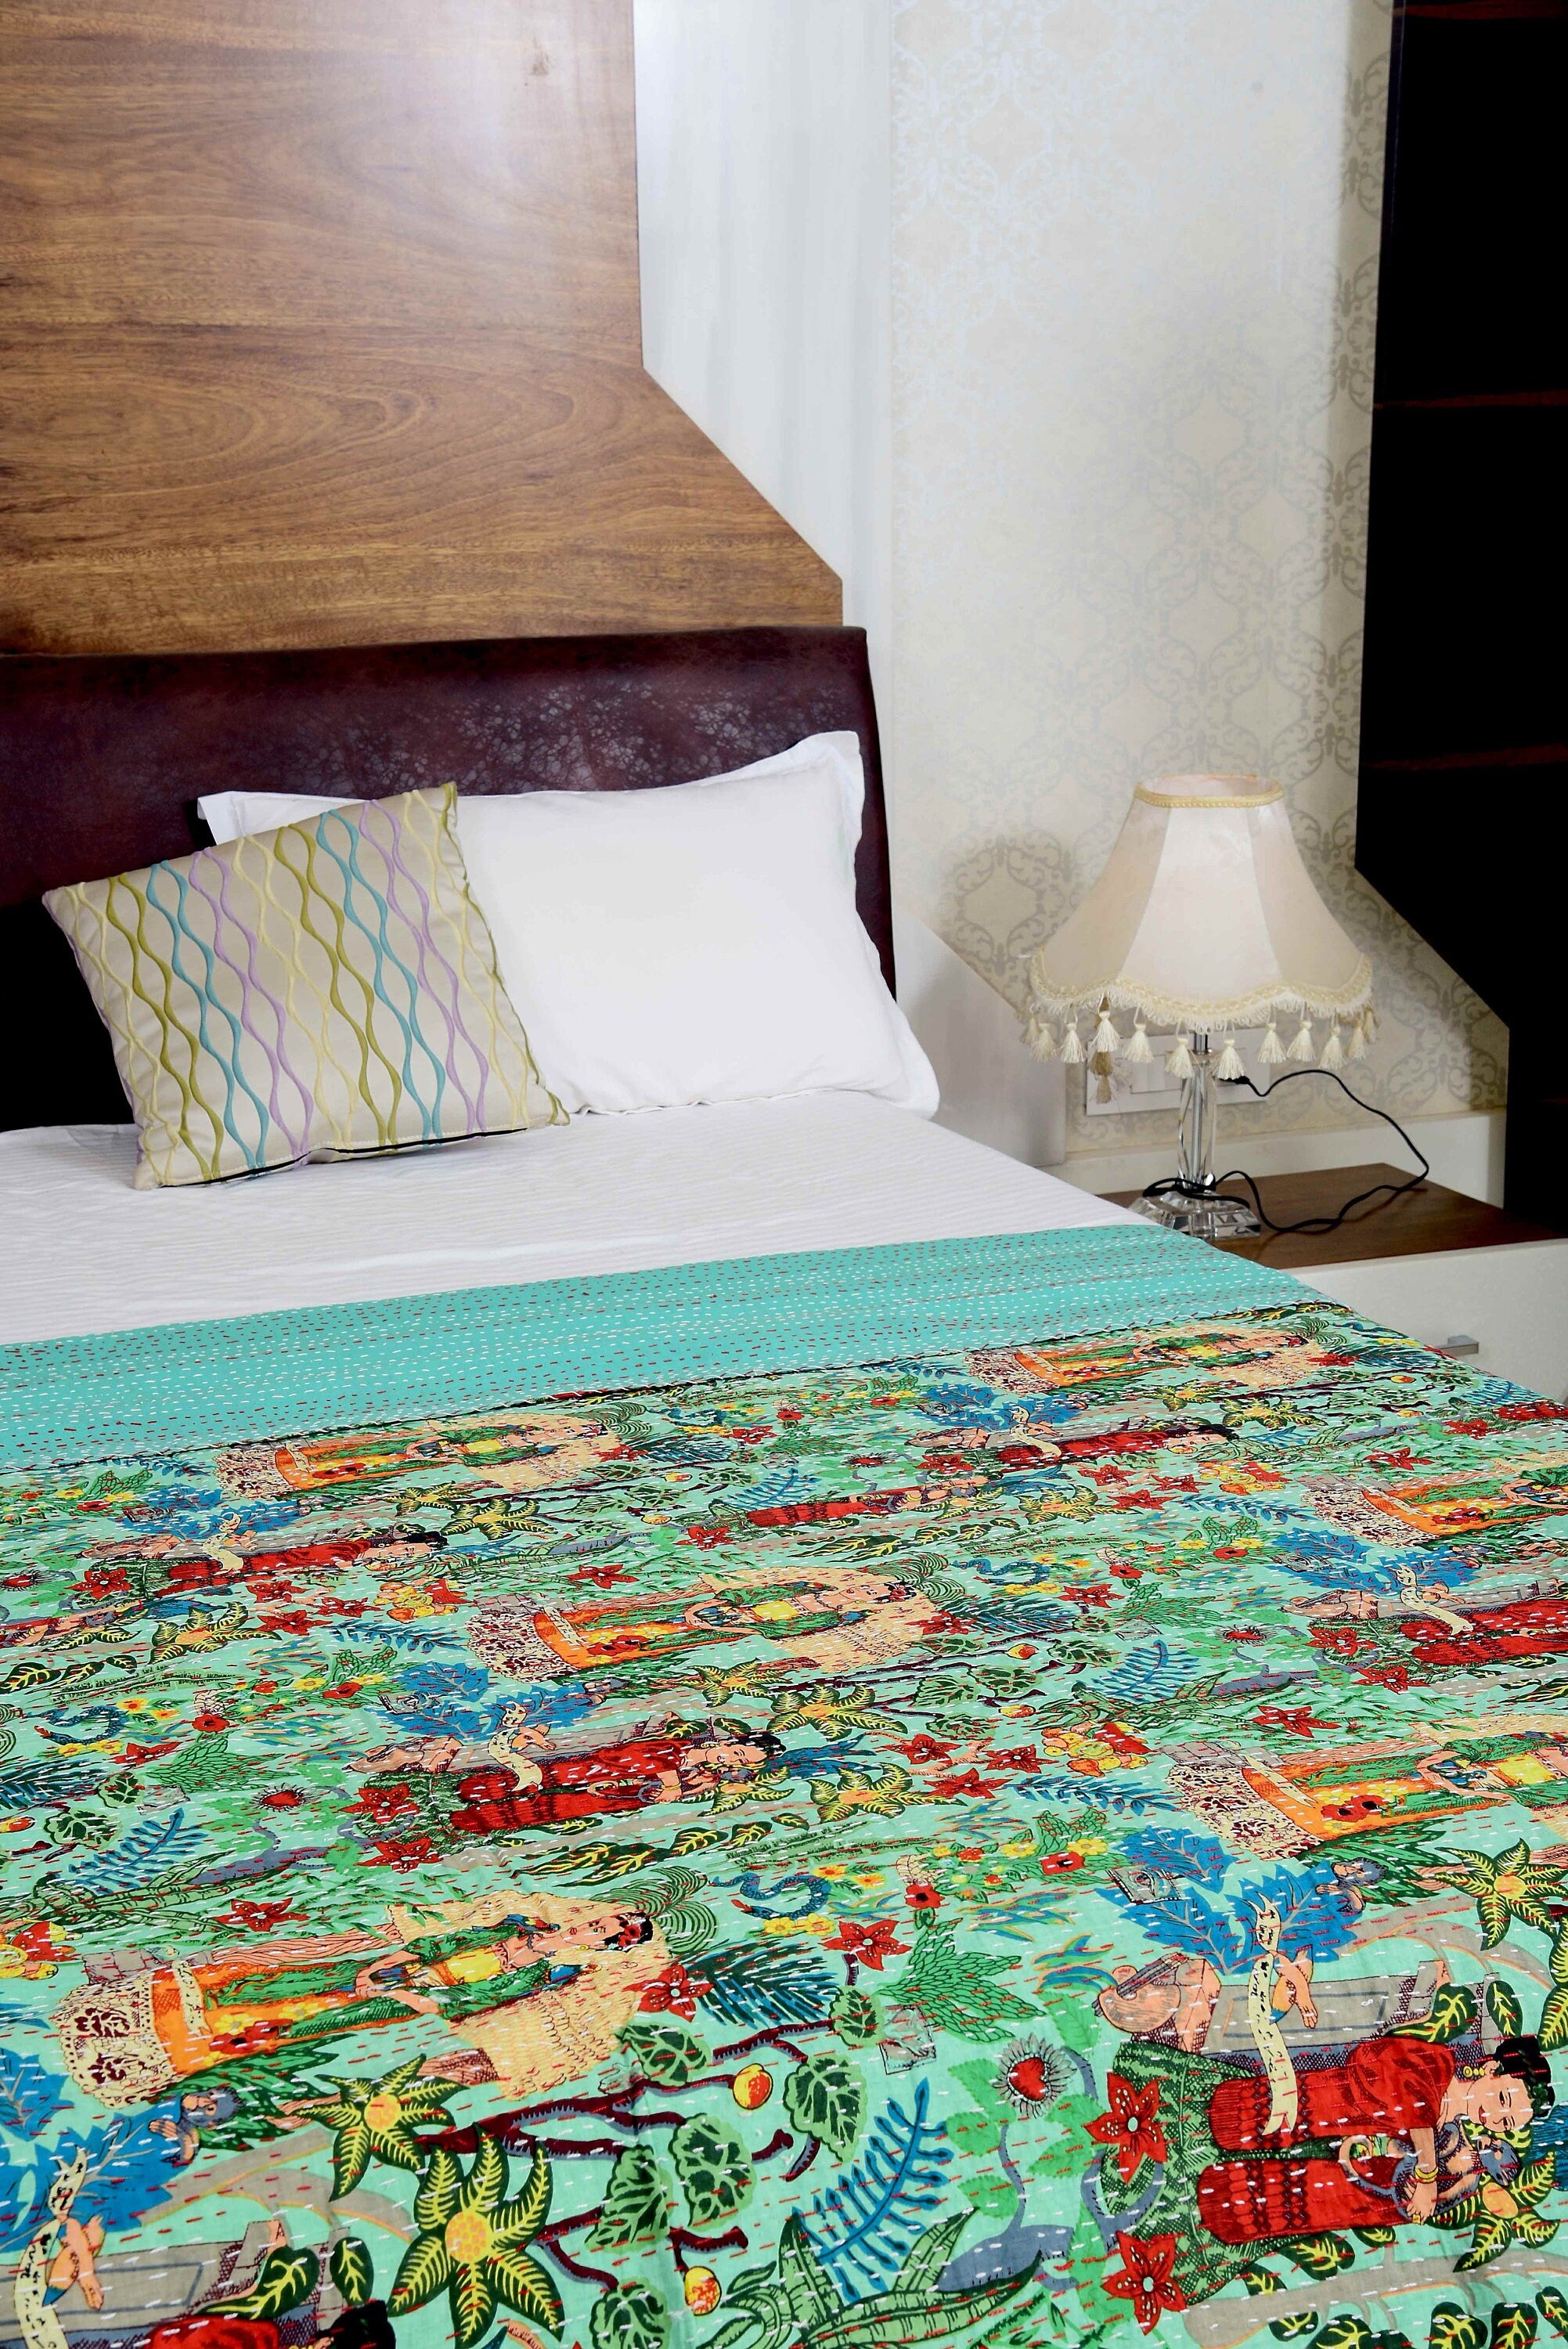 Details about   Blanket Cotton Deco Farida Kahlo Indian Throw Bedspread Kantha Reversible Quilt 